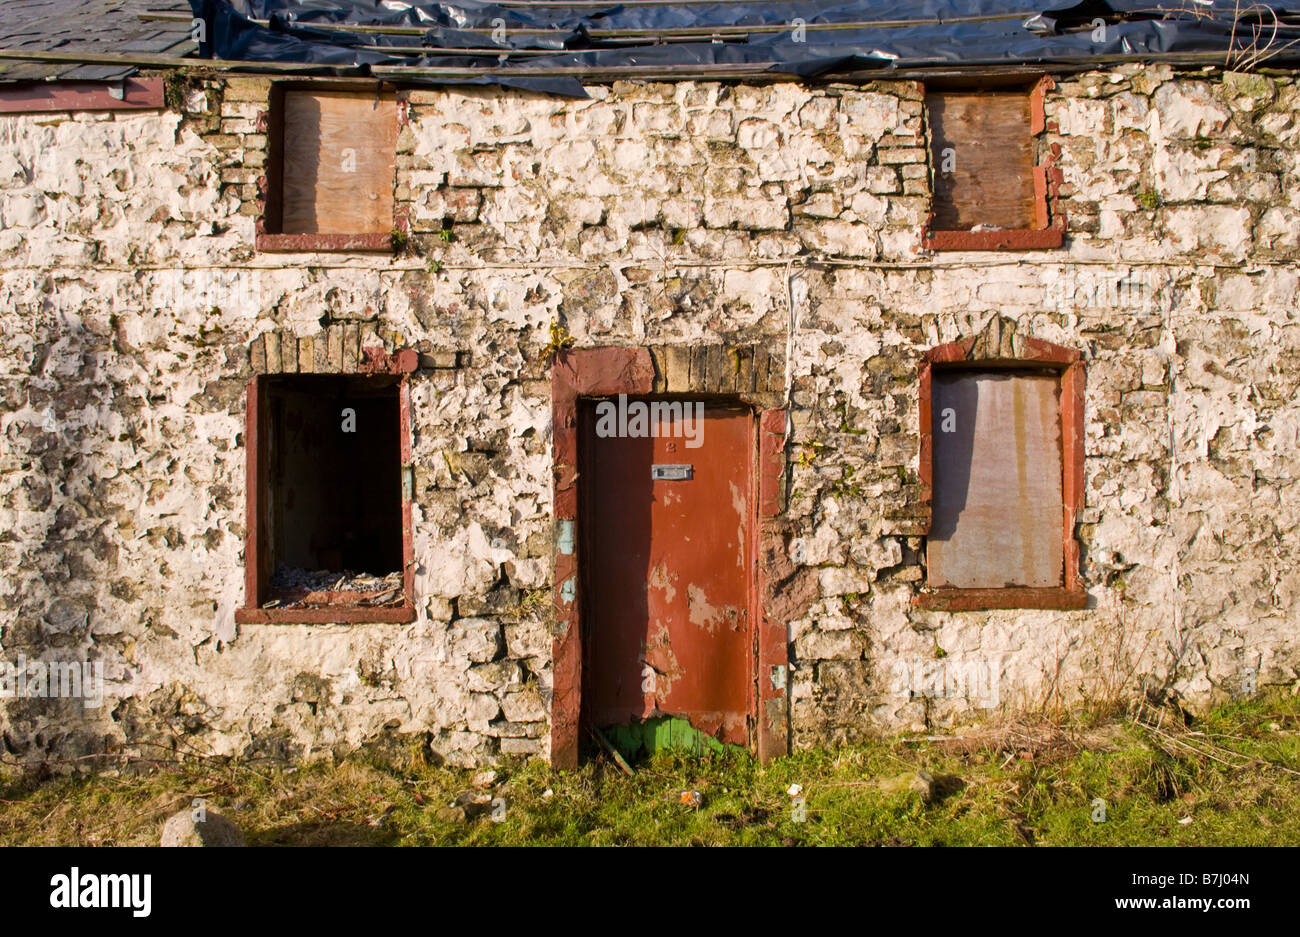 Boarded Up Derelict Row Of 4 Terraced Stone Cottages For Sale By